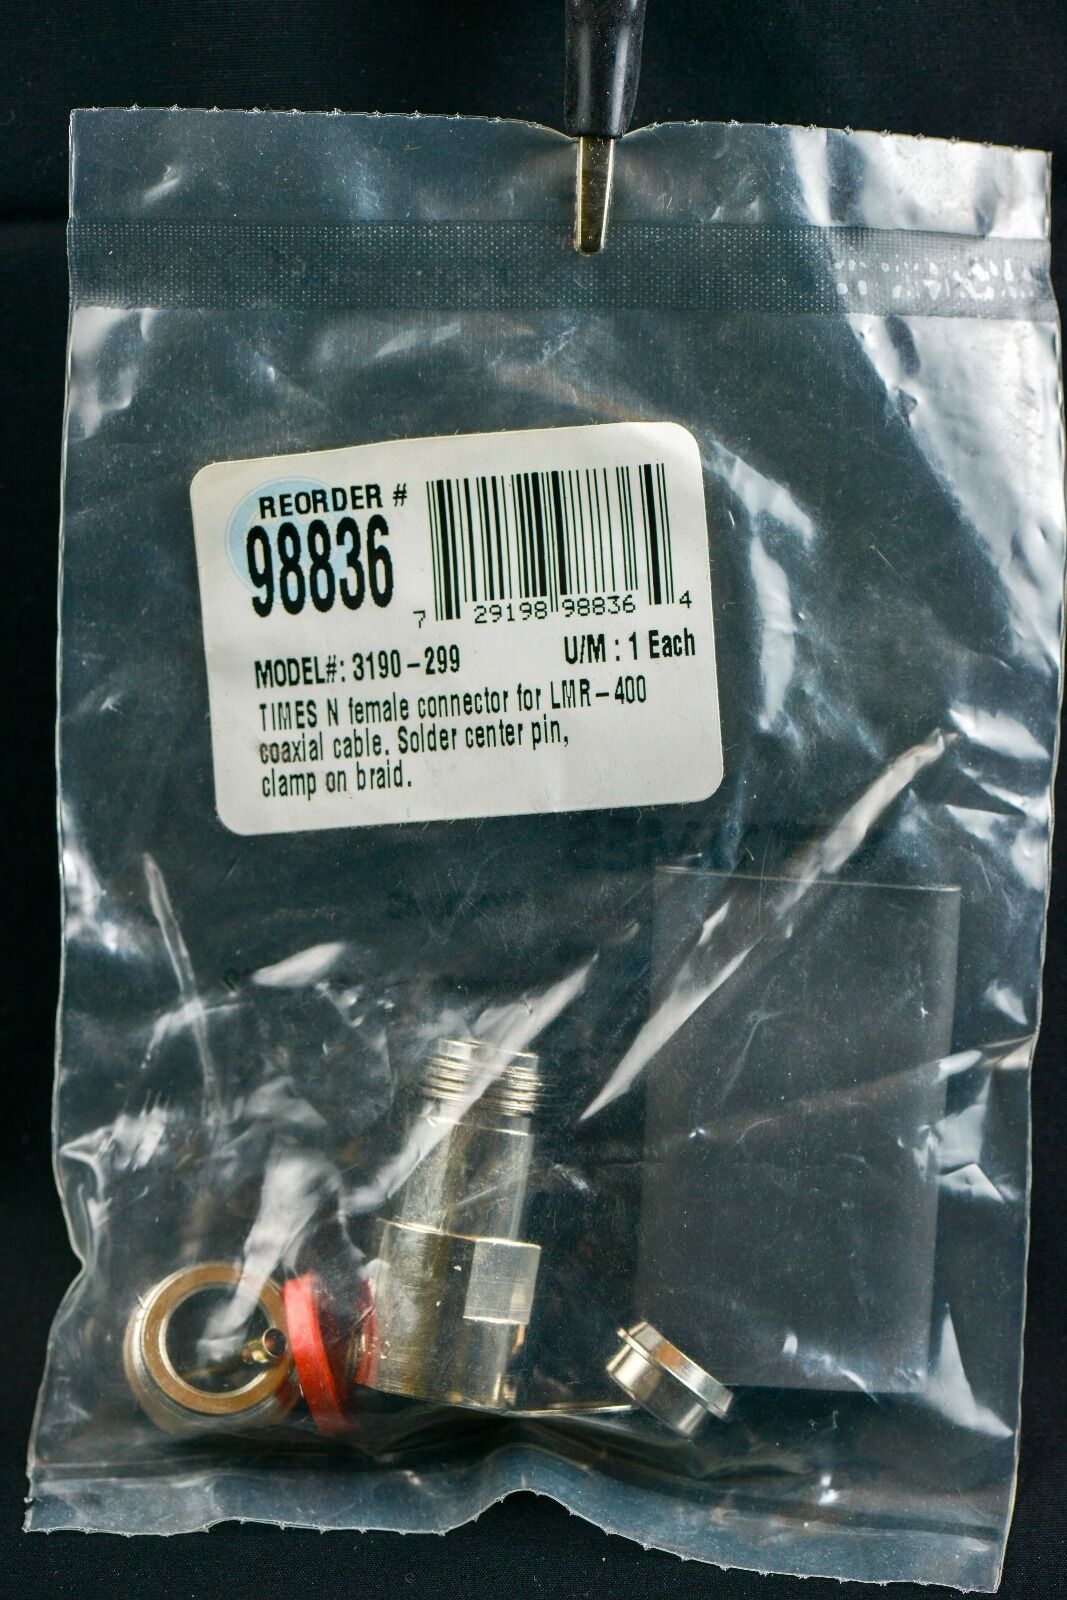 Times Microwave #3190-299 (N Female Connector to LMR-400 Coaxial Cable). Available Now for $15.00